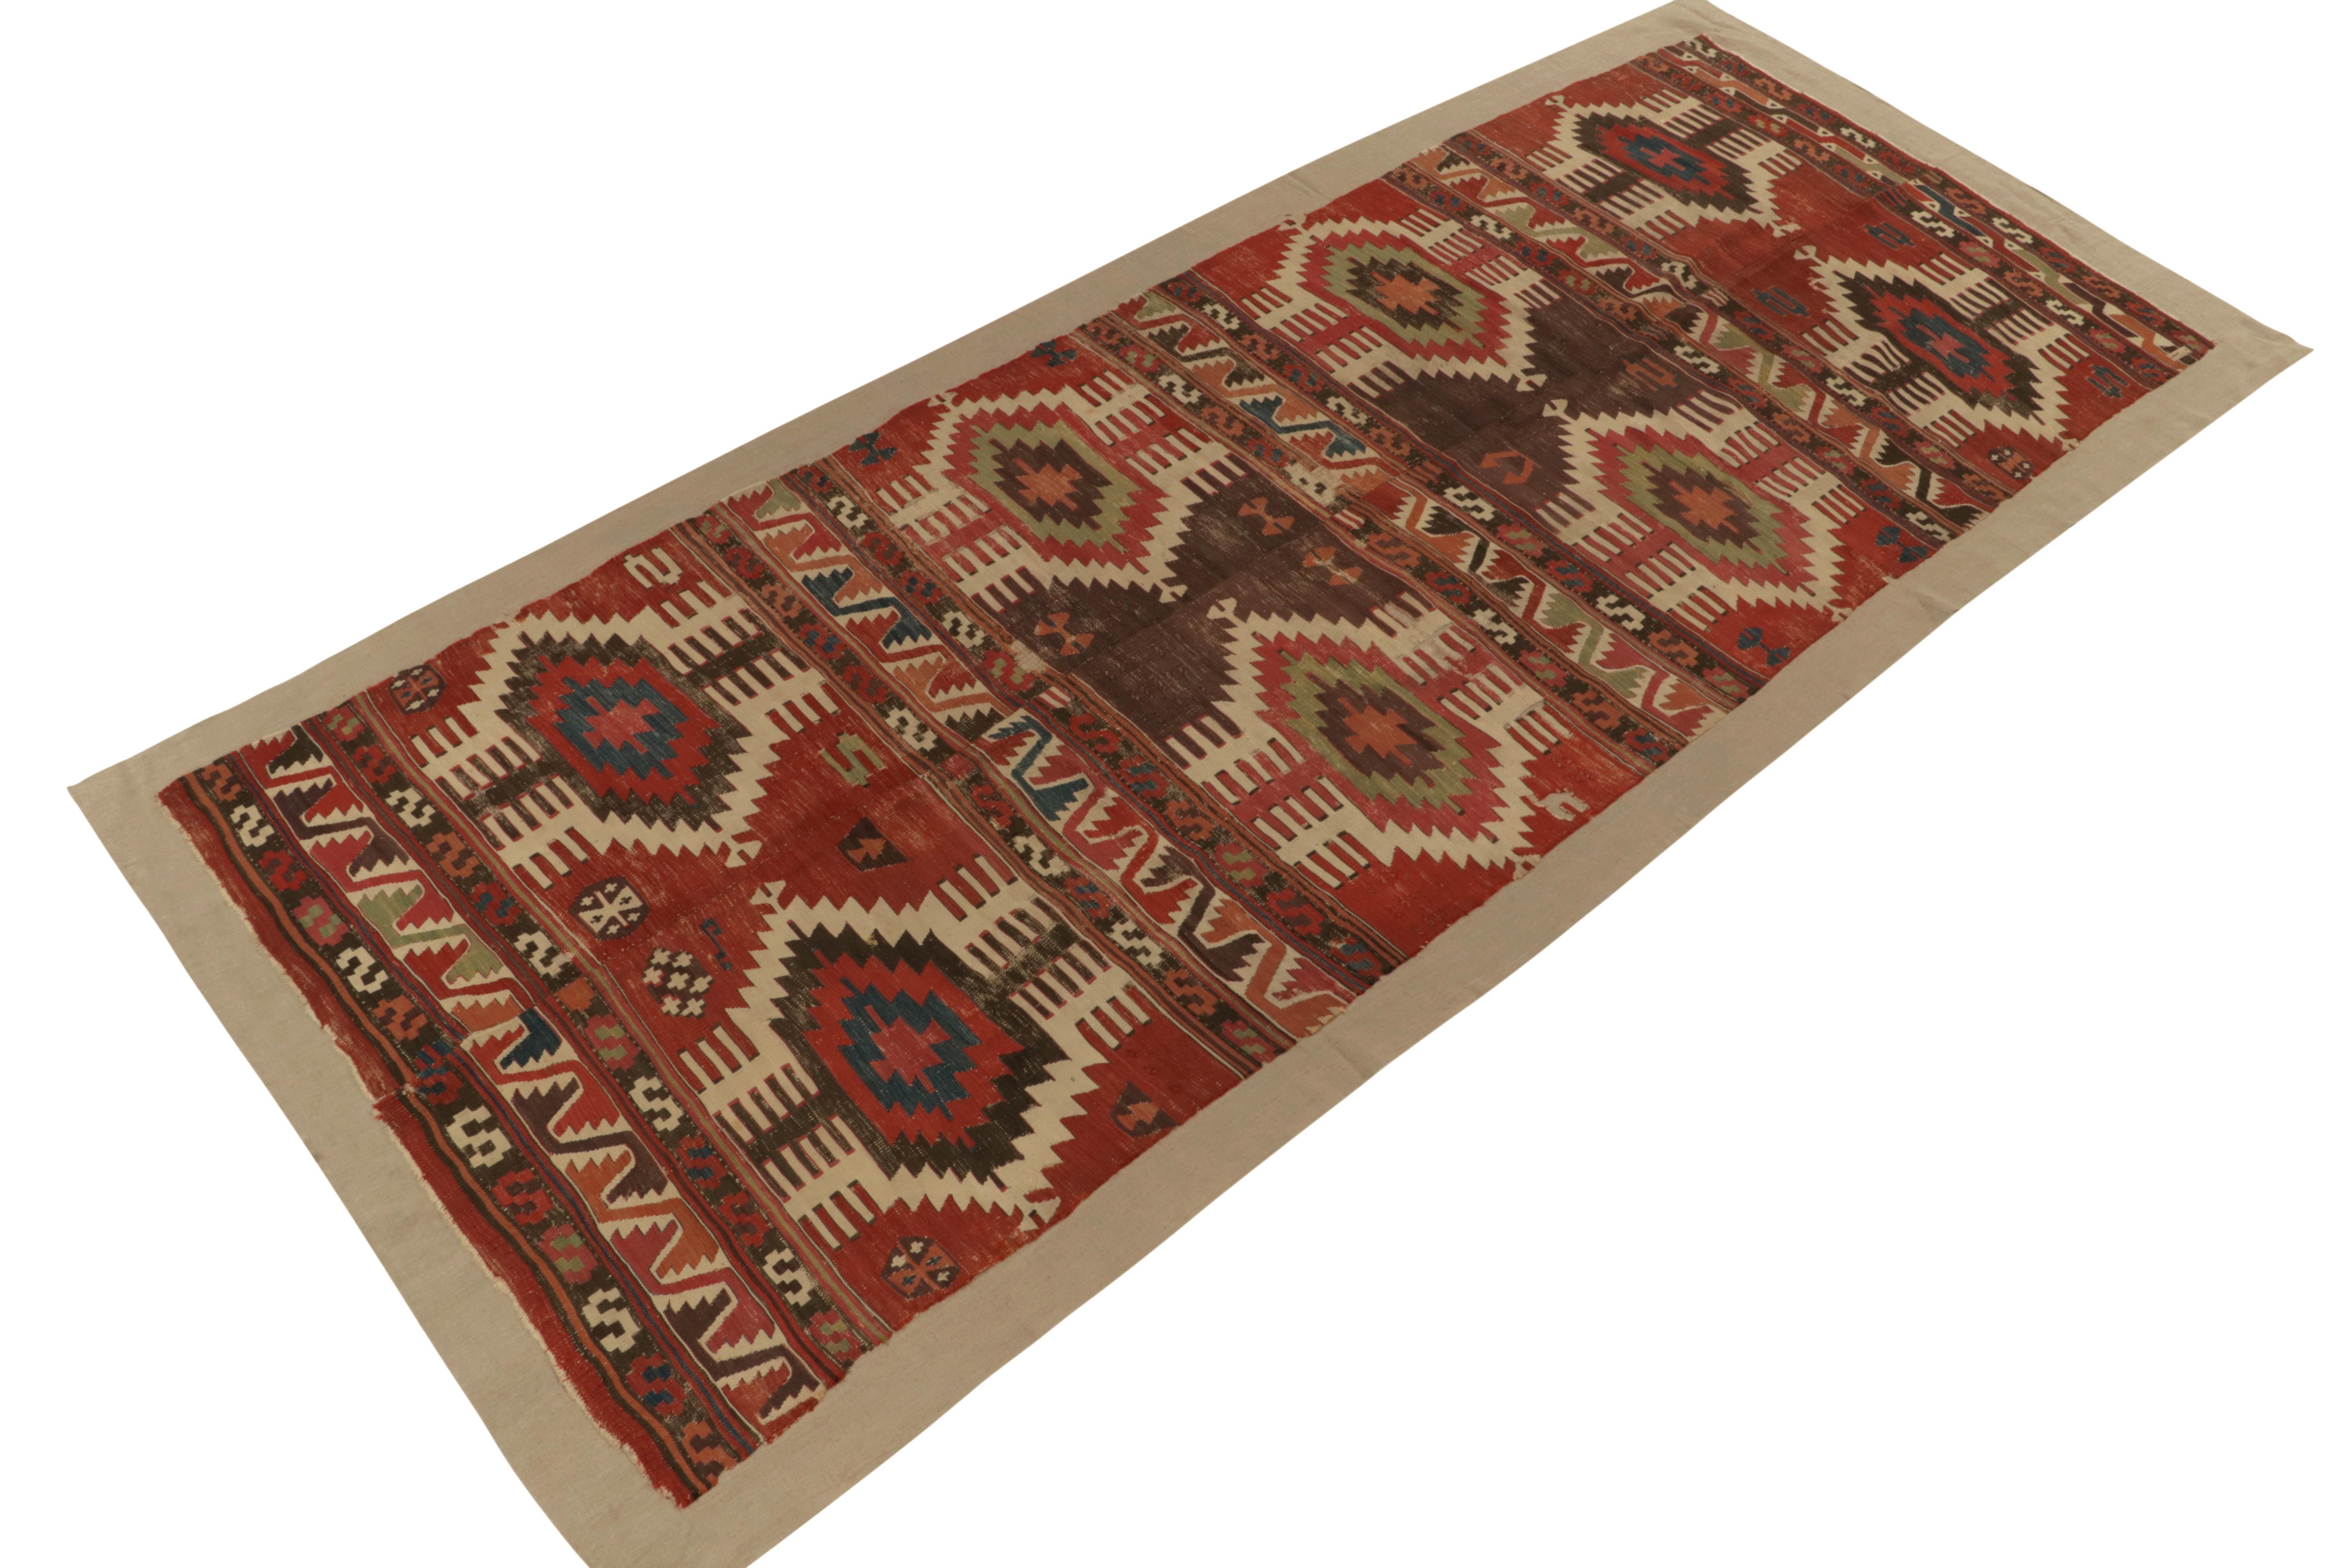 A gracious 5x12 antique kilim rug from our most cherished flatweave selections, handwoven in wool circa 1920-1930.

On the Design: Believed to originate from Karapinar region of Turkey, R&K Principal Josh Nazmiyal has personally referred to this